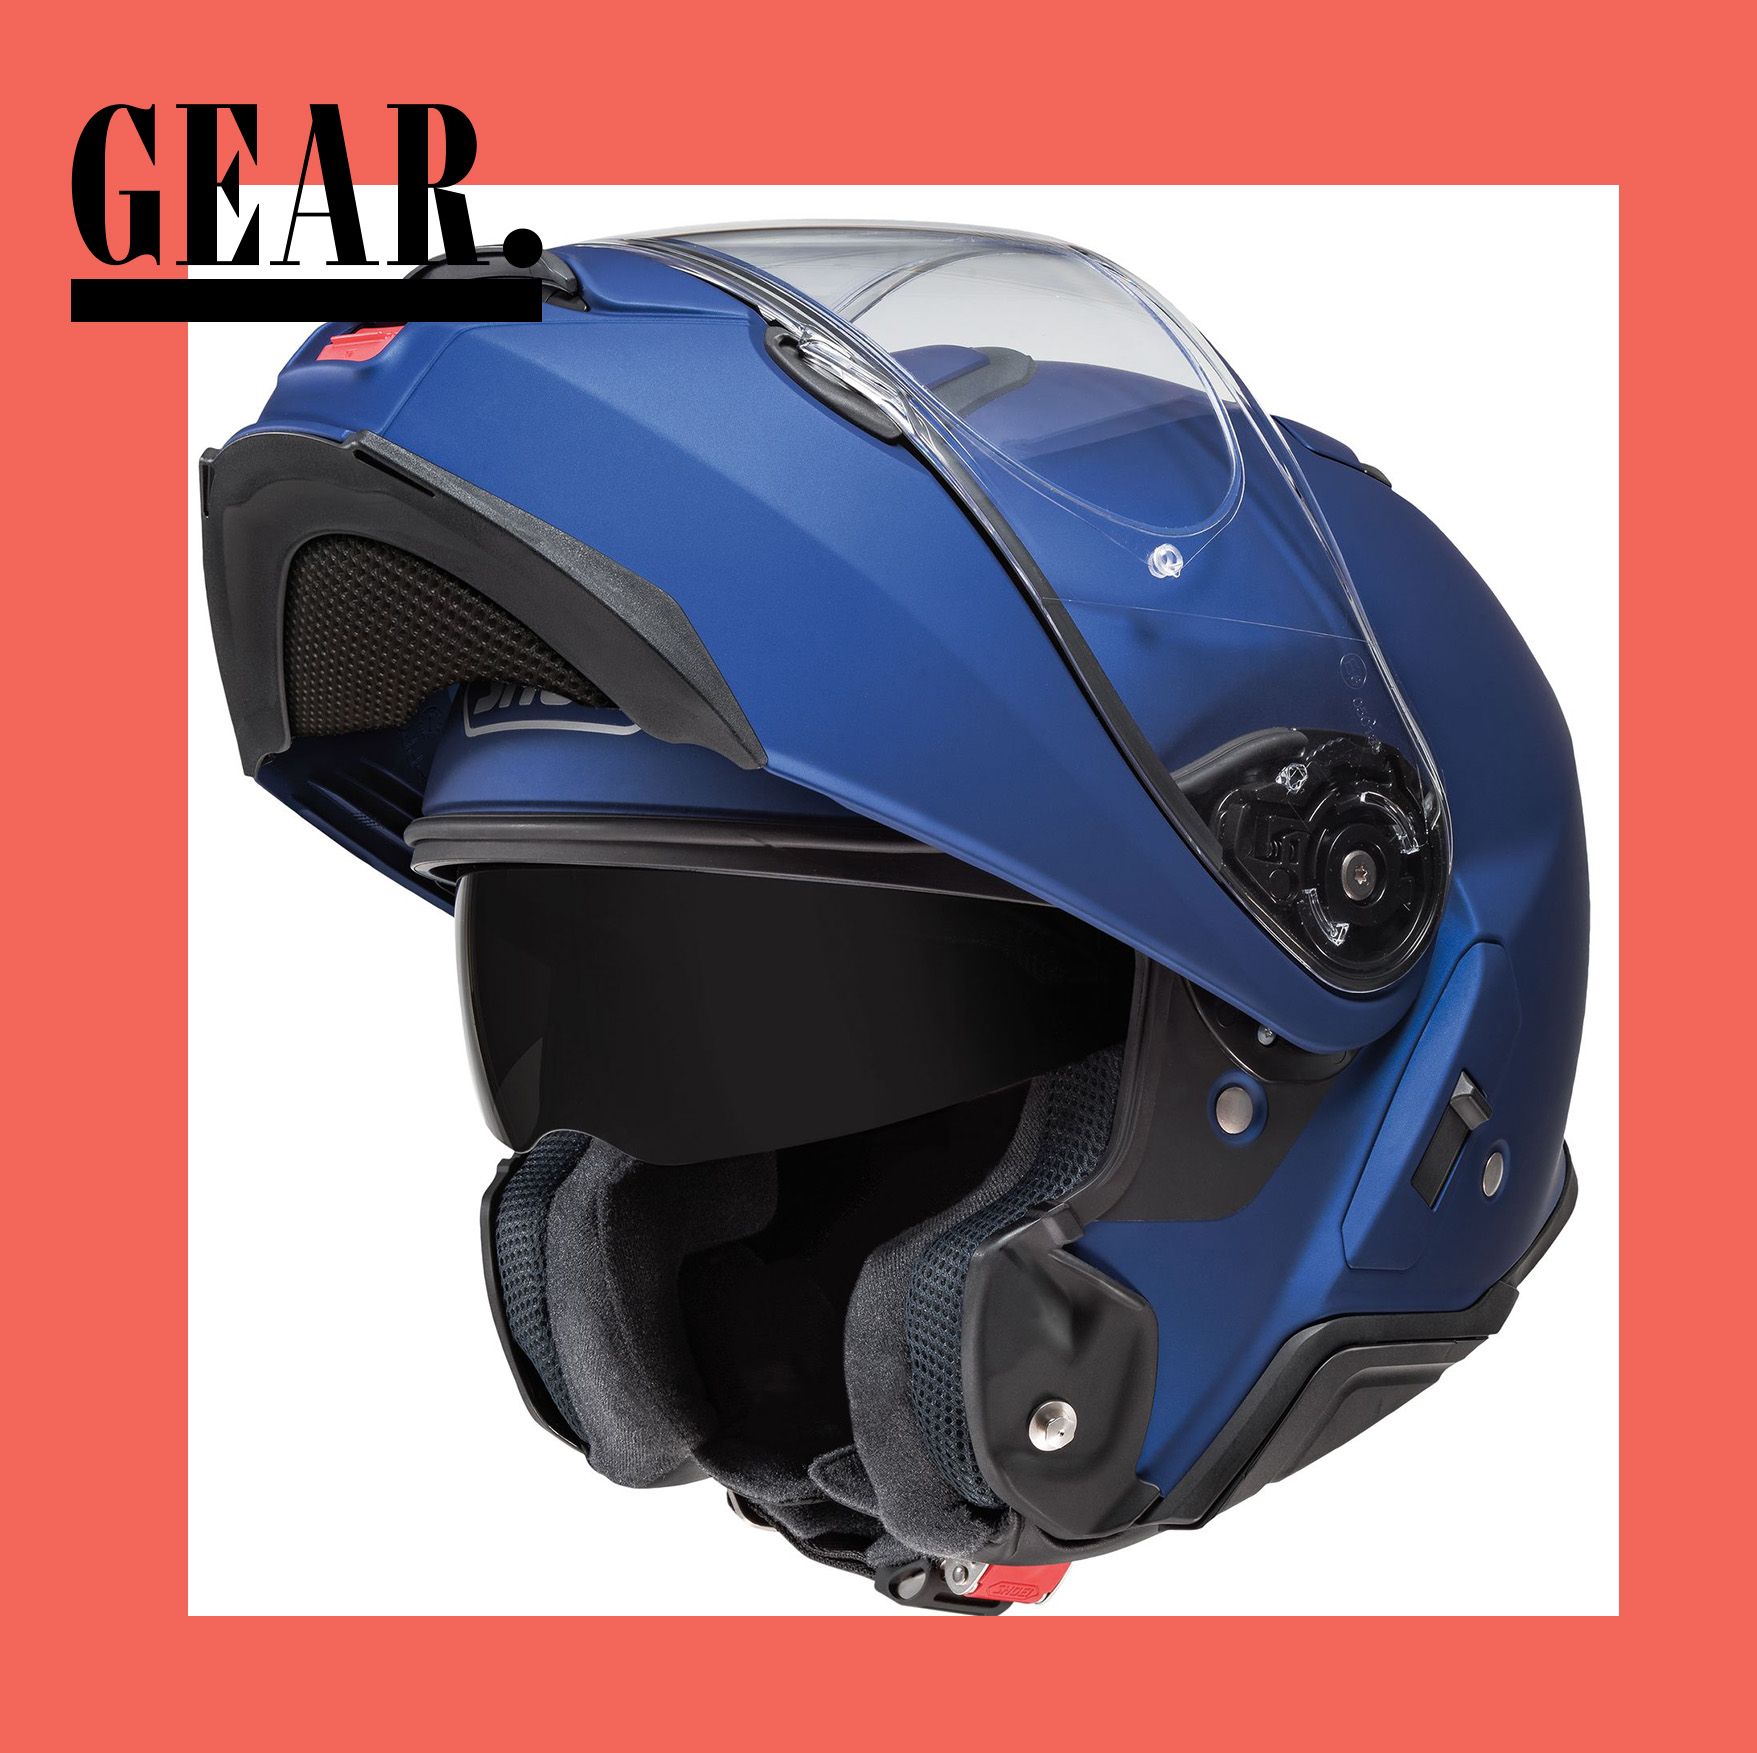 Expert Picks for the Best Motorcycle Helmets You Can Buy